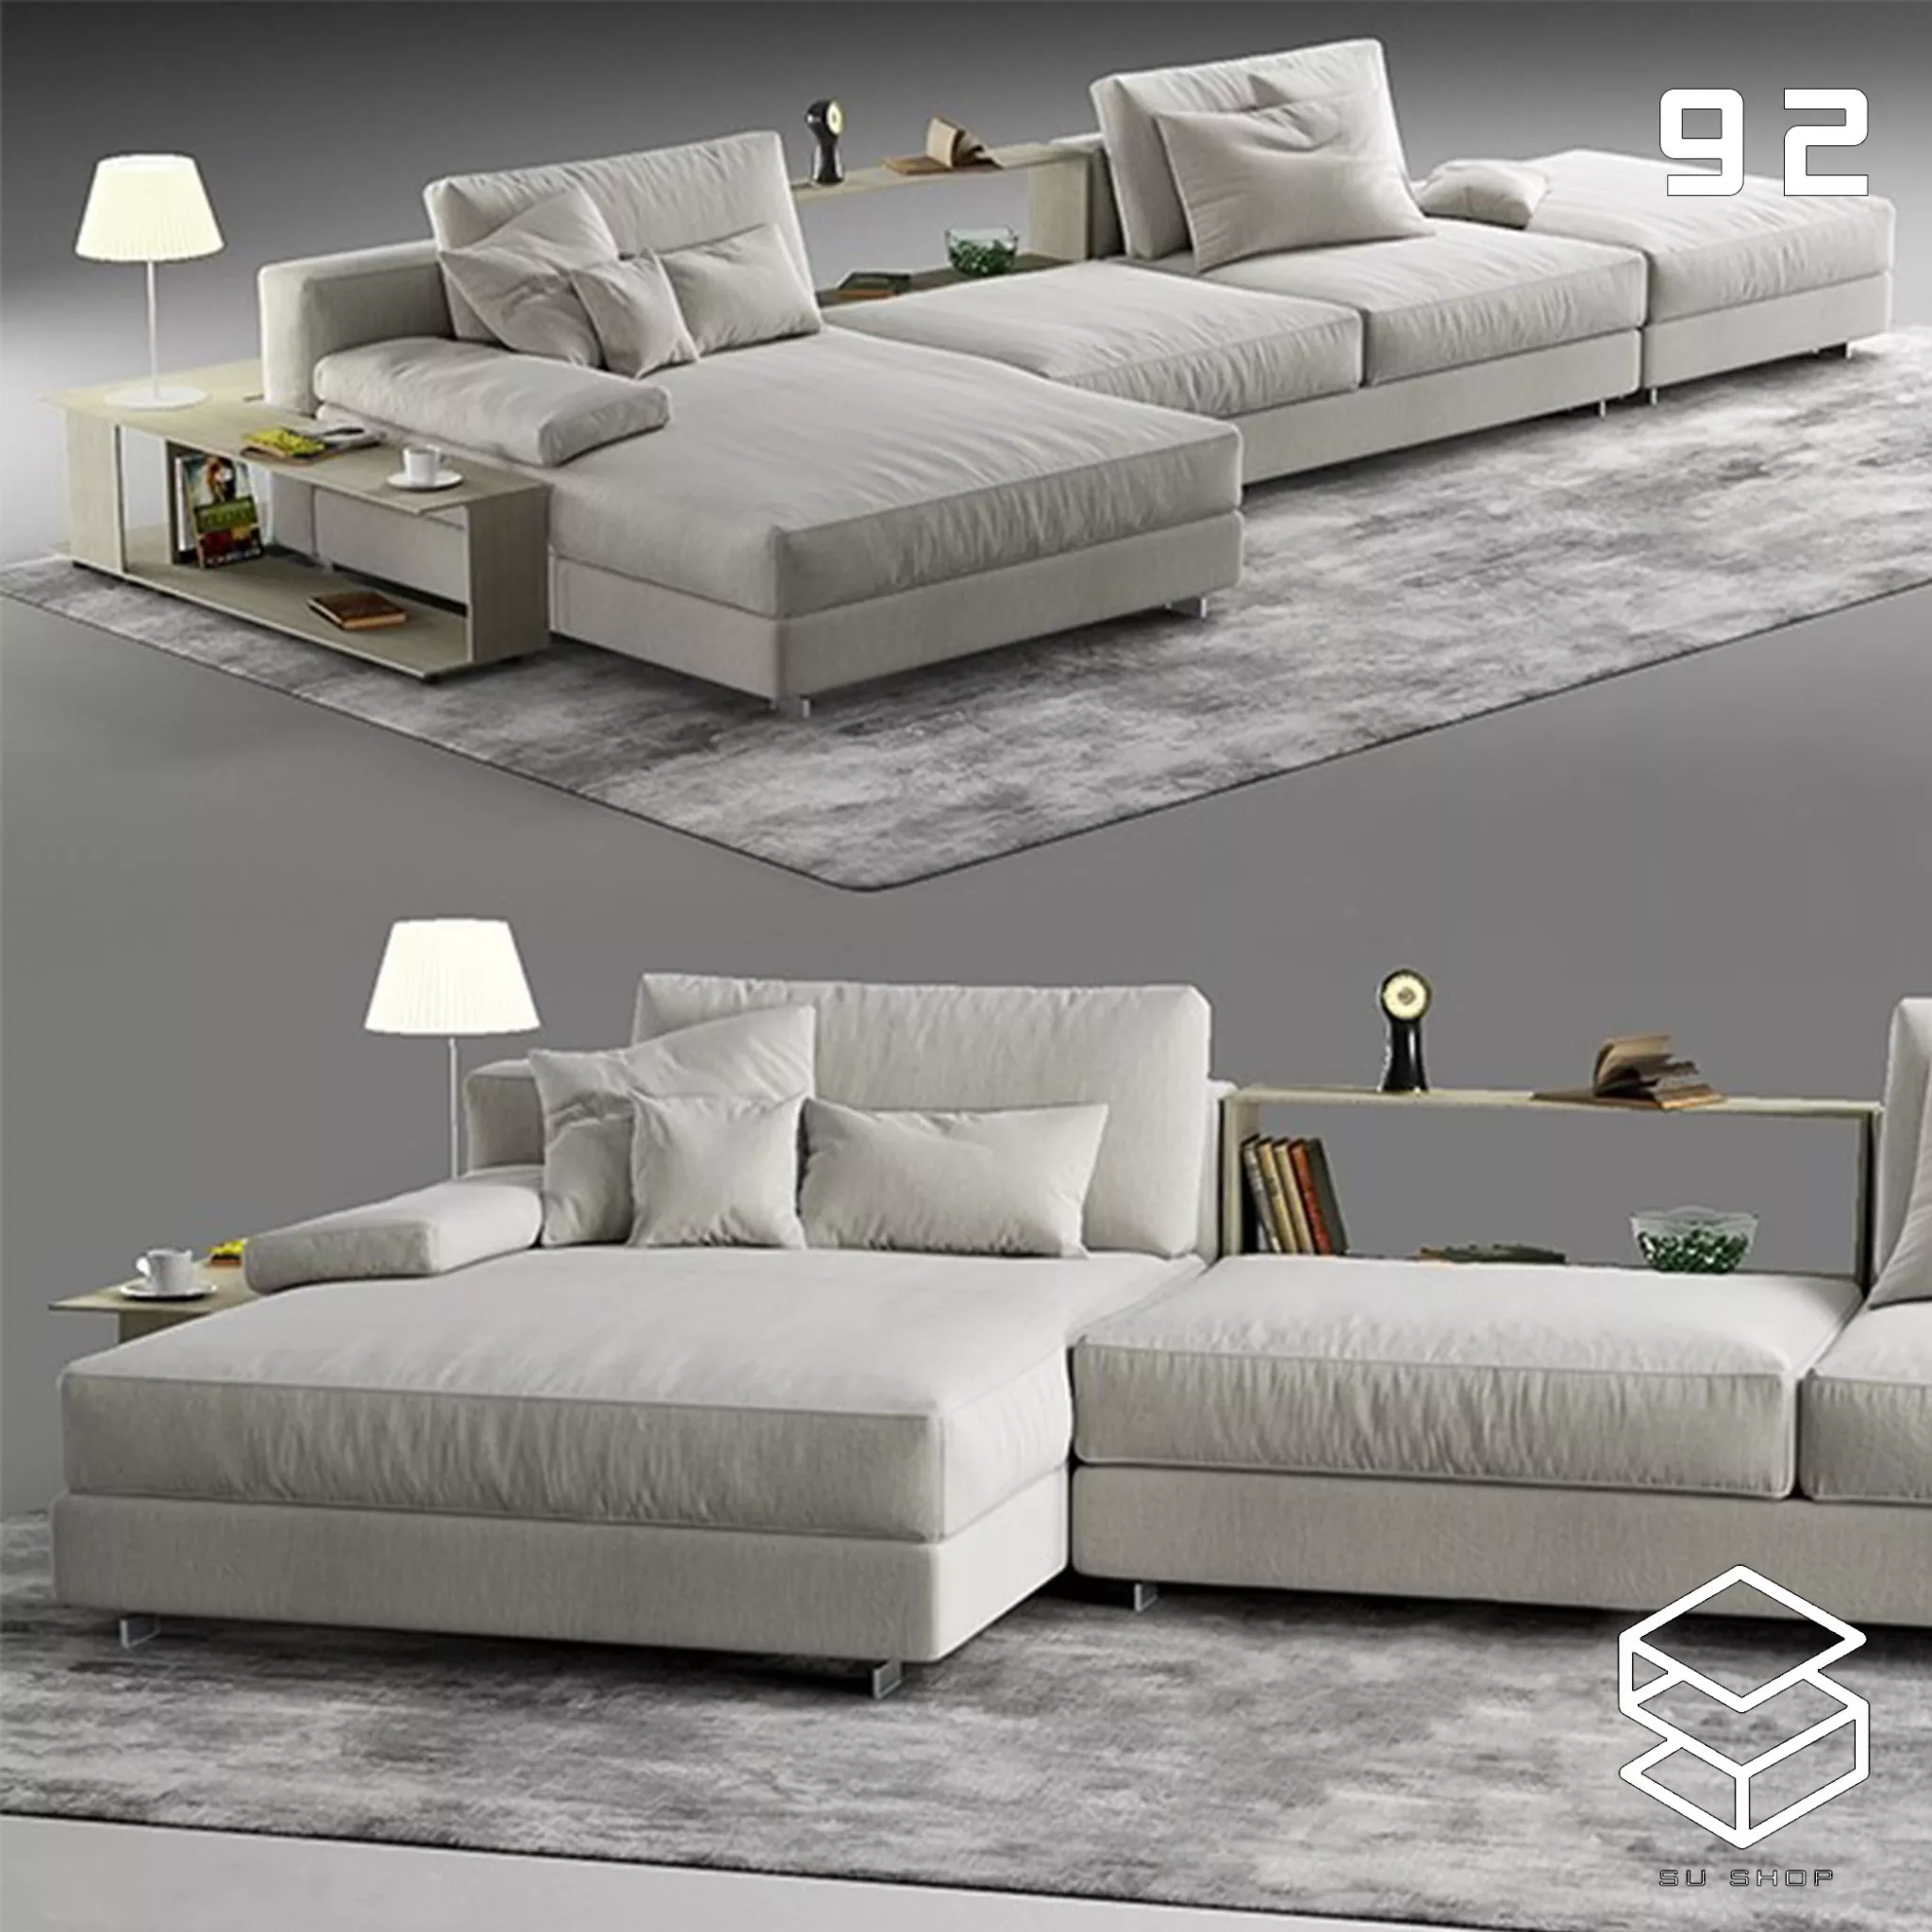 MODERN SOFA - SKETCHUP 3D MODEL - VRAY OR ENSCAPE - ID13721